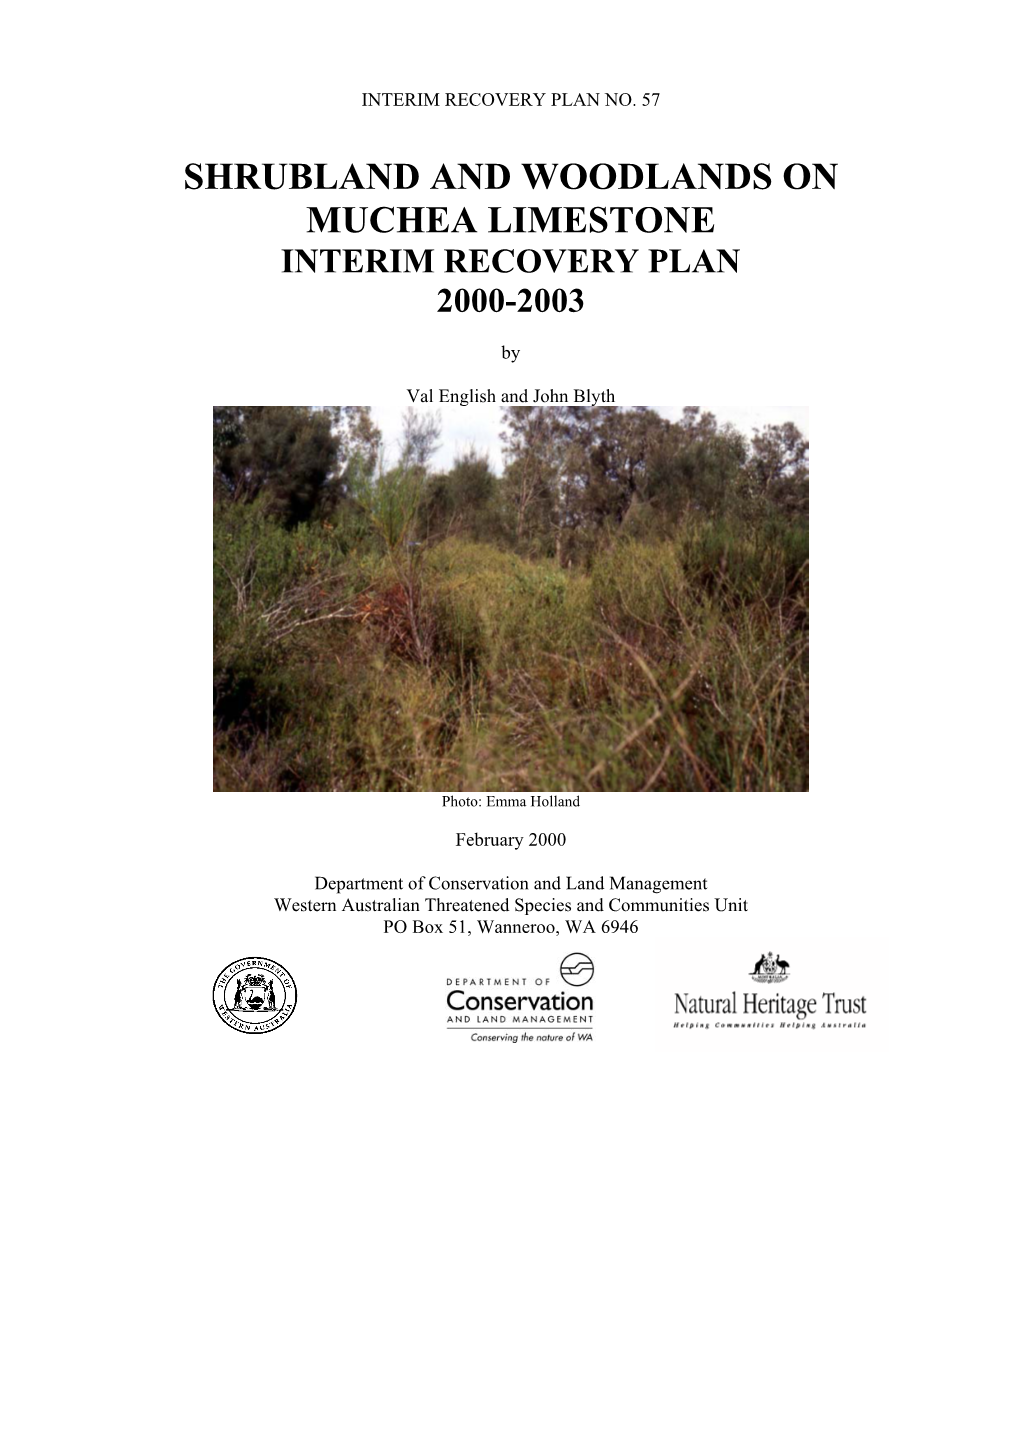 Shrubland and Woodlands on Muchea Limestone Interim Recovery Plan 2000-2003